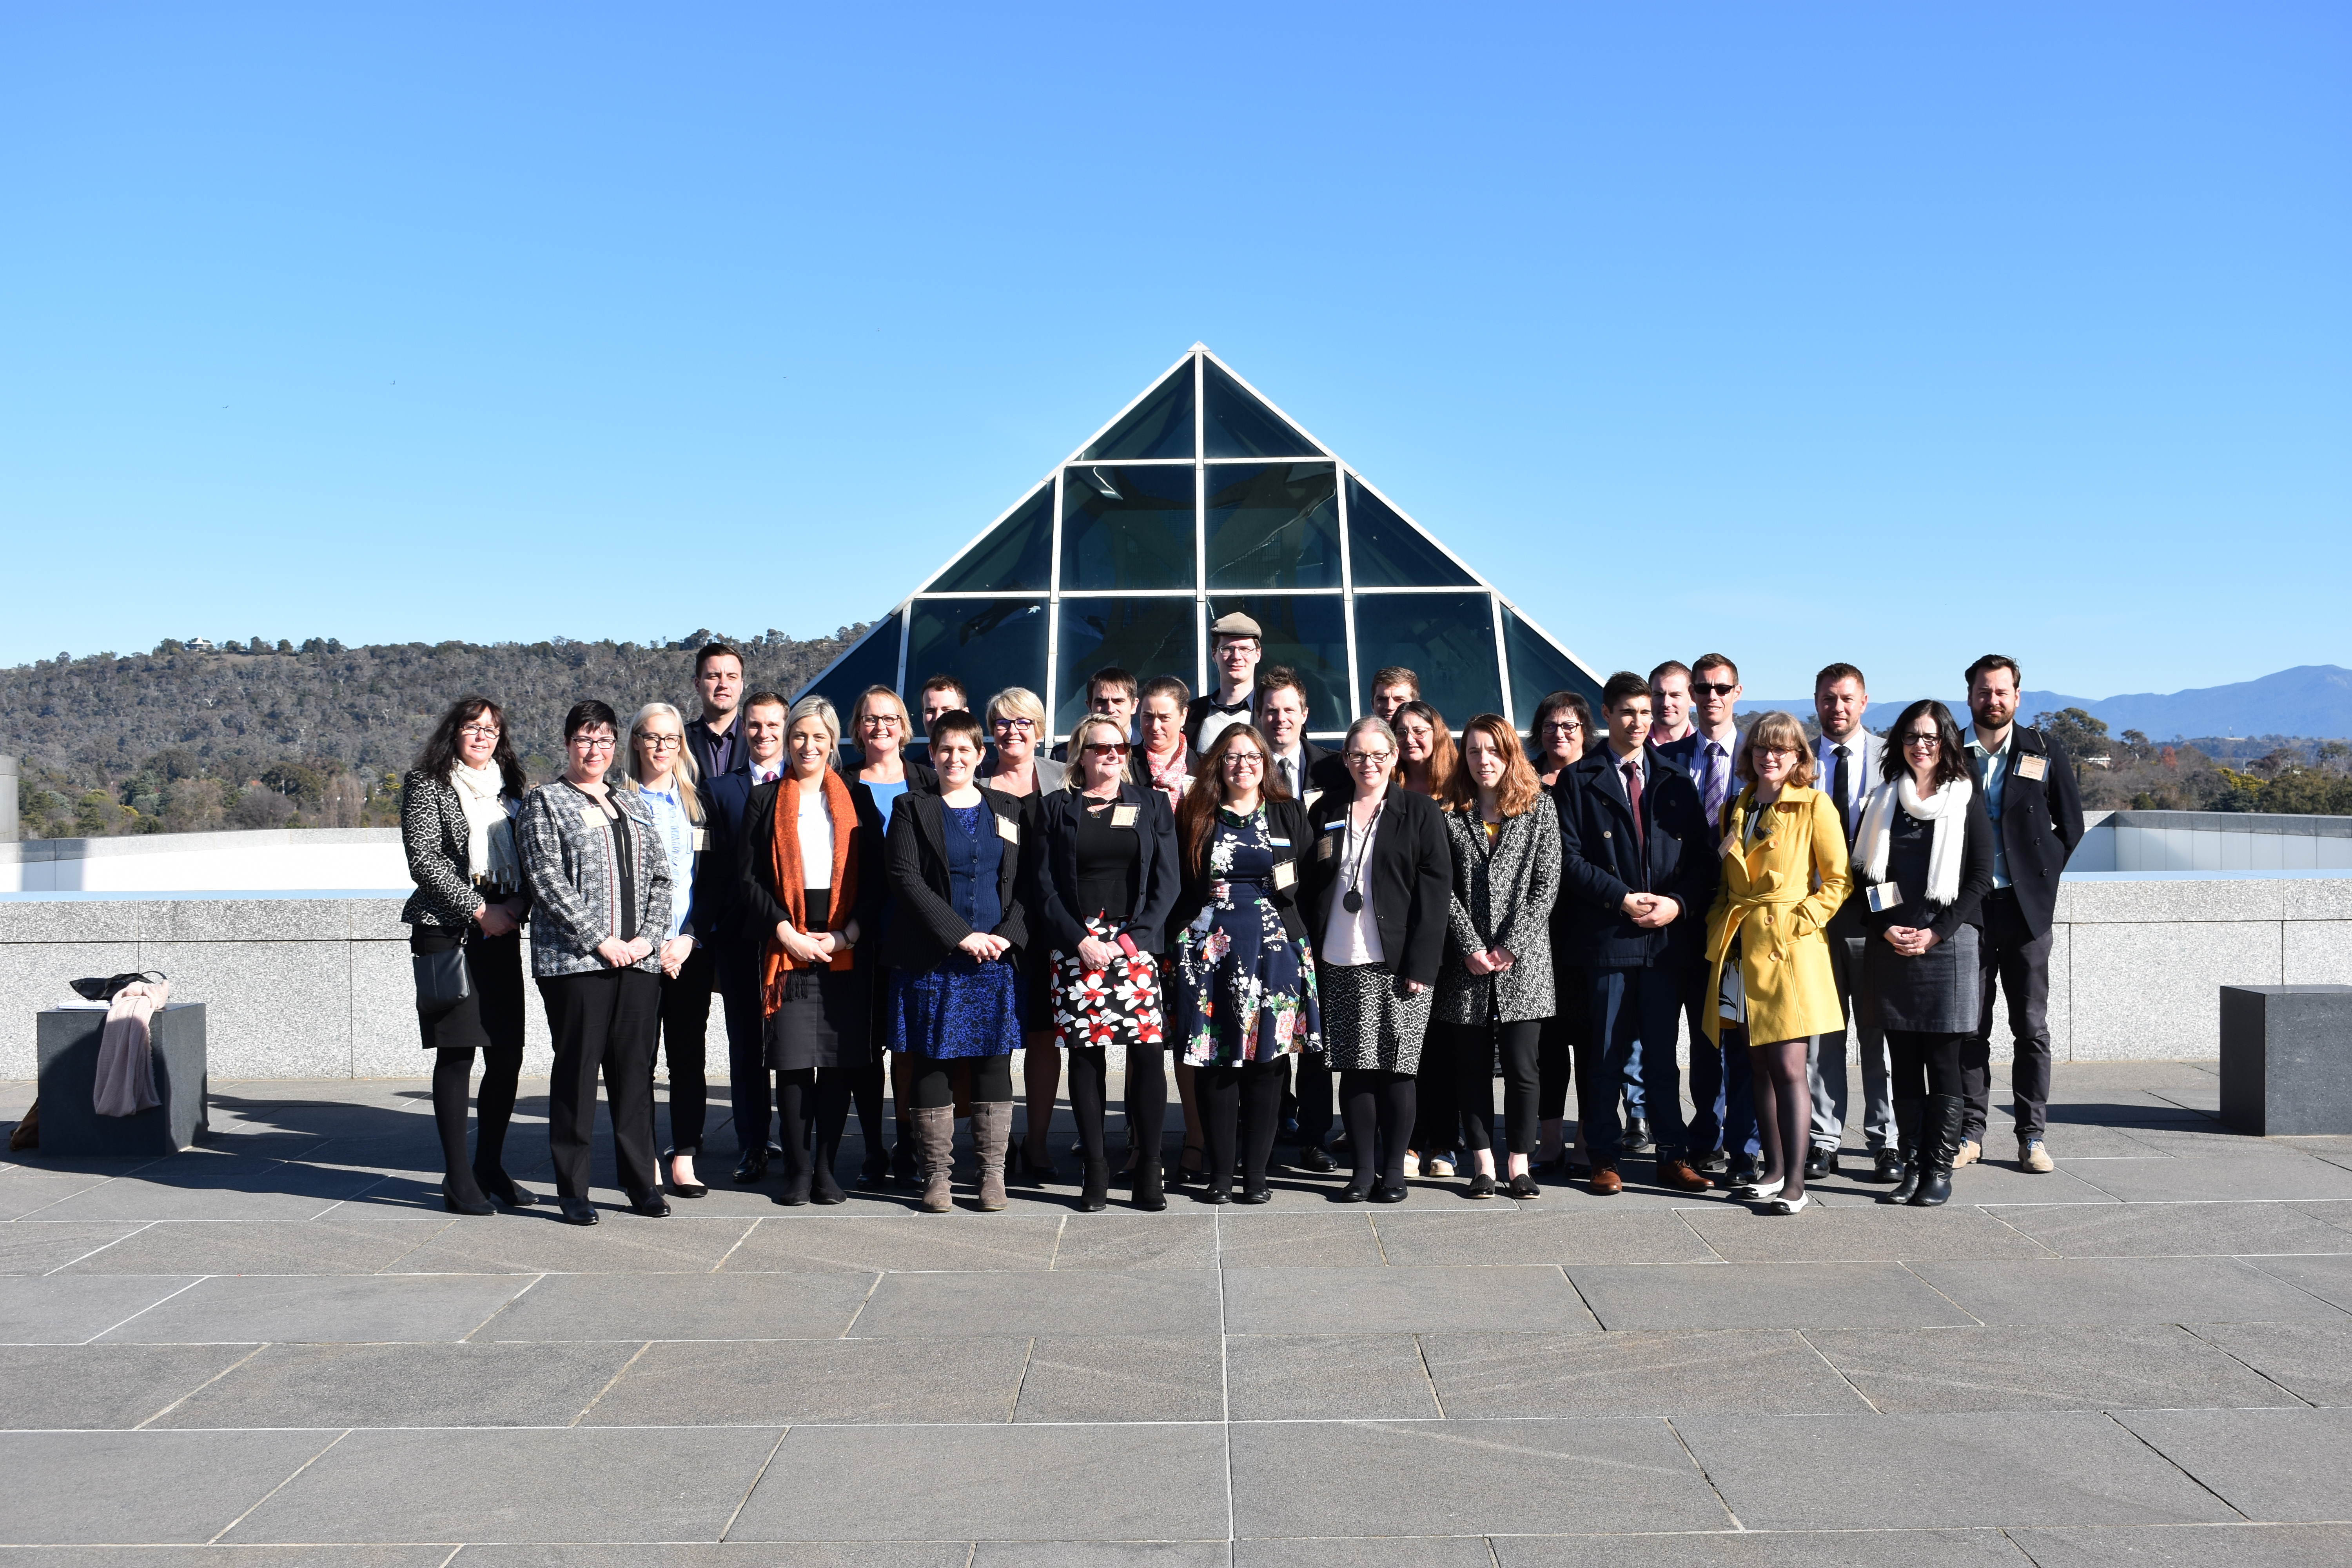 http://lbwr.org/images/Leaders Forum participants on the roof of Parliament House.JPG